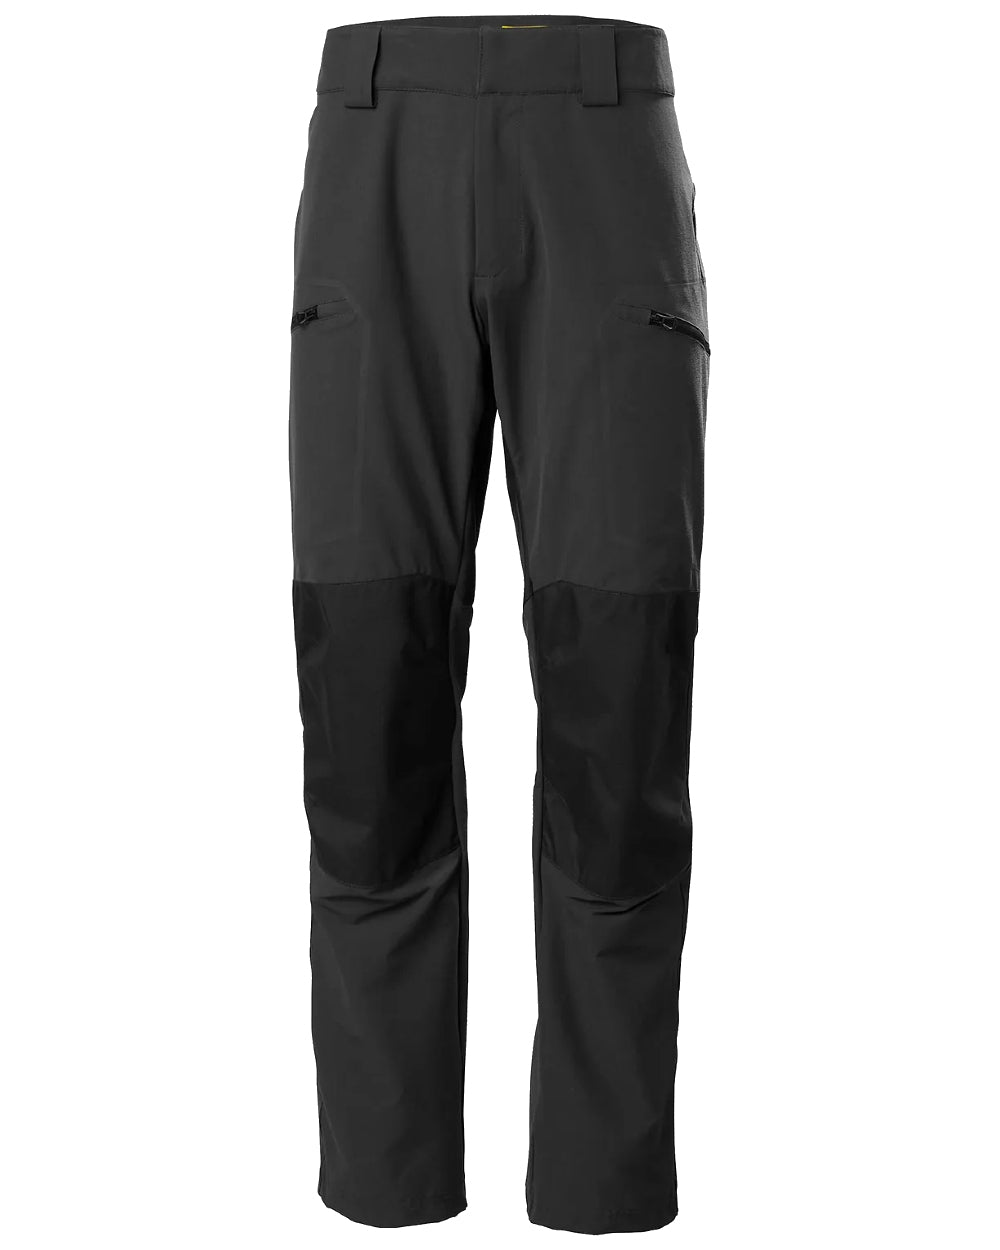 Ebony coloured Helly Hansen Mens HP Racing Deck Pants on white background 